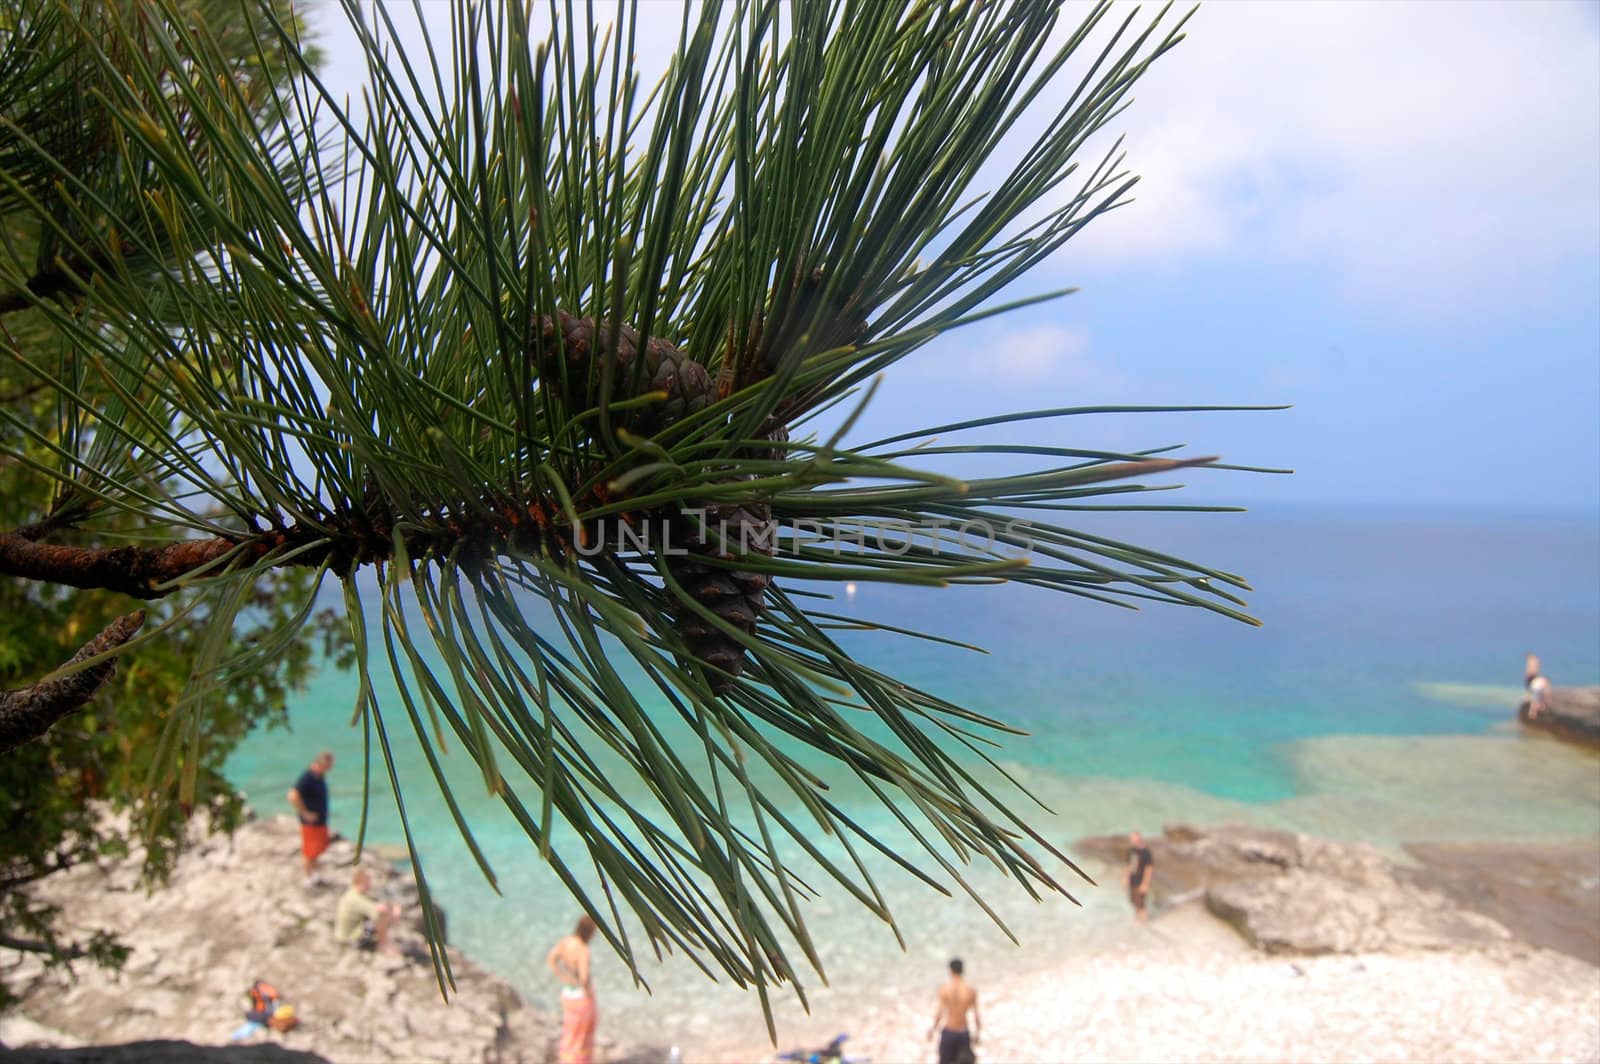 Pine needles and swimmers by tyroneburkemedia@gmail.com